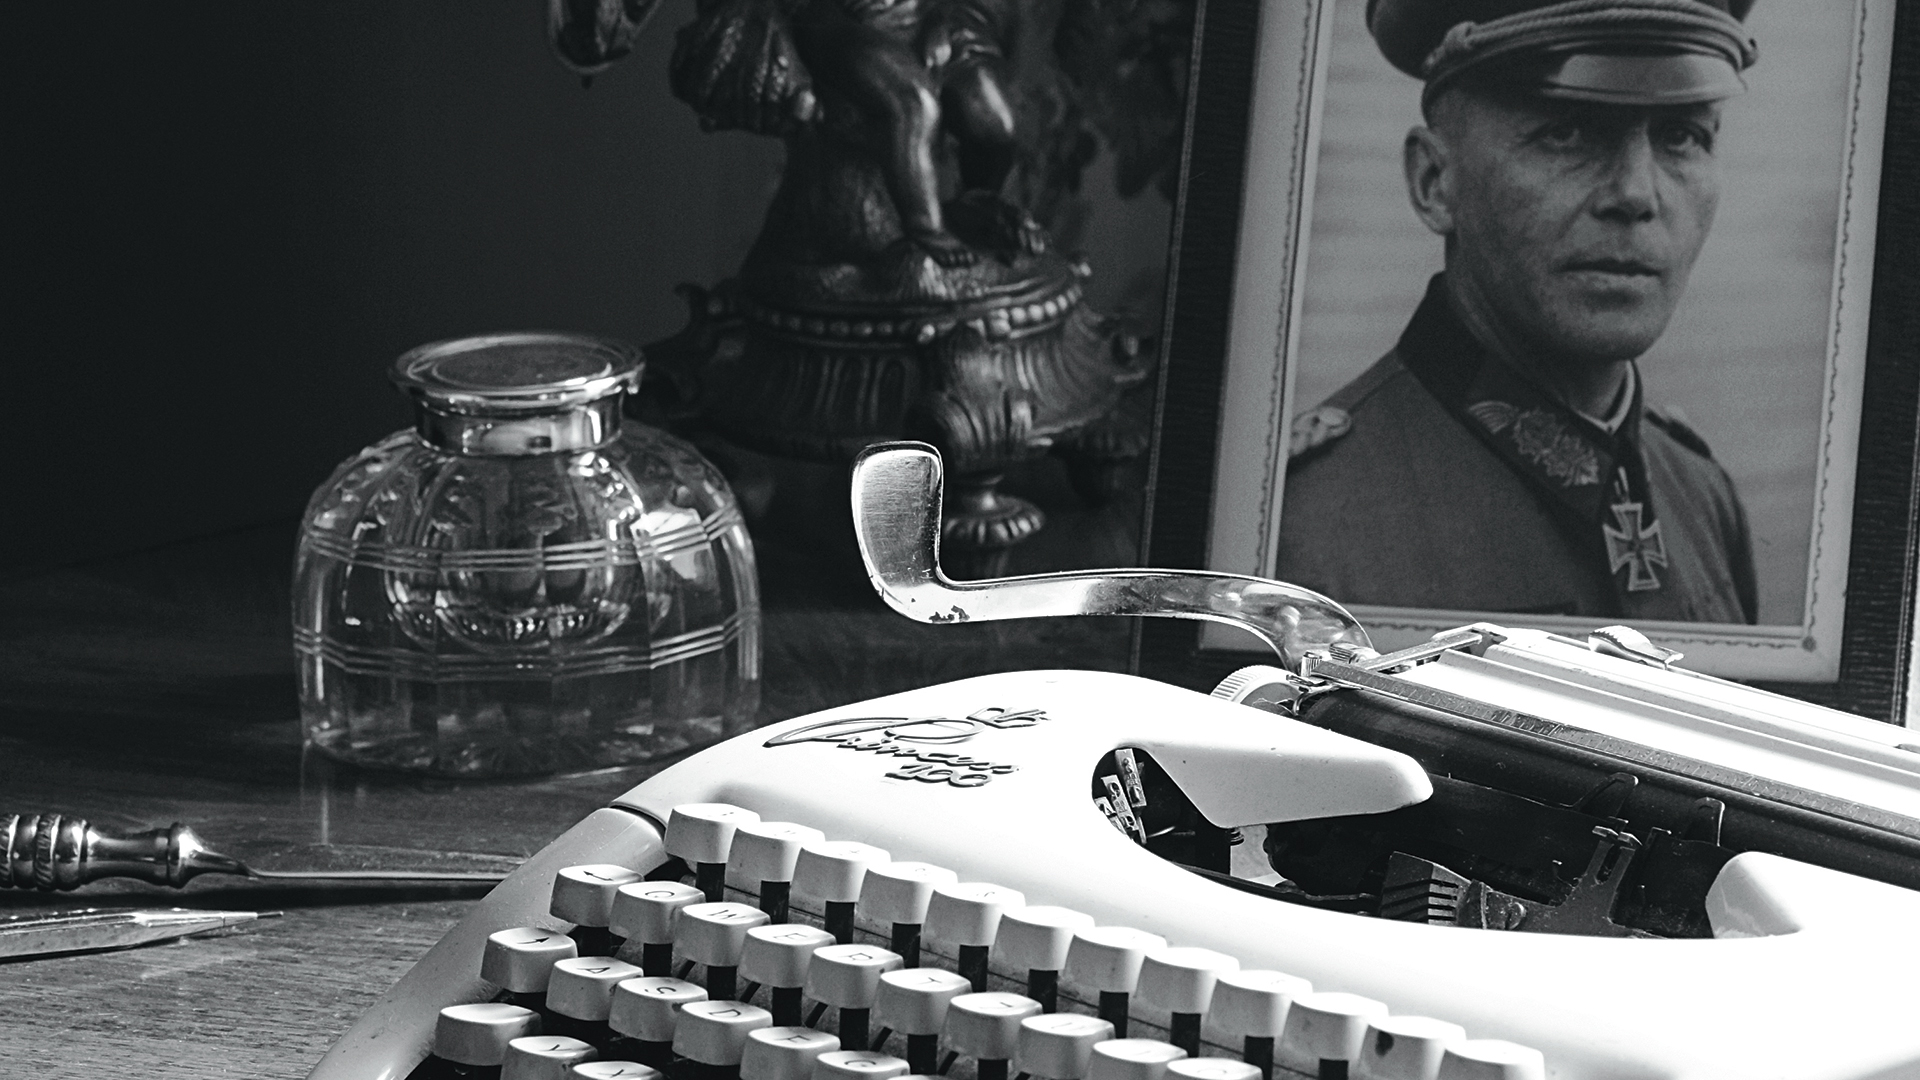 A typewriter and a photo of a German in Nazi uniform